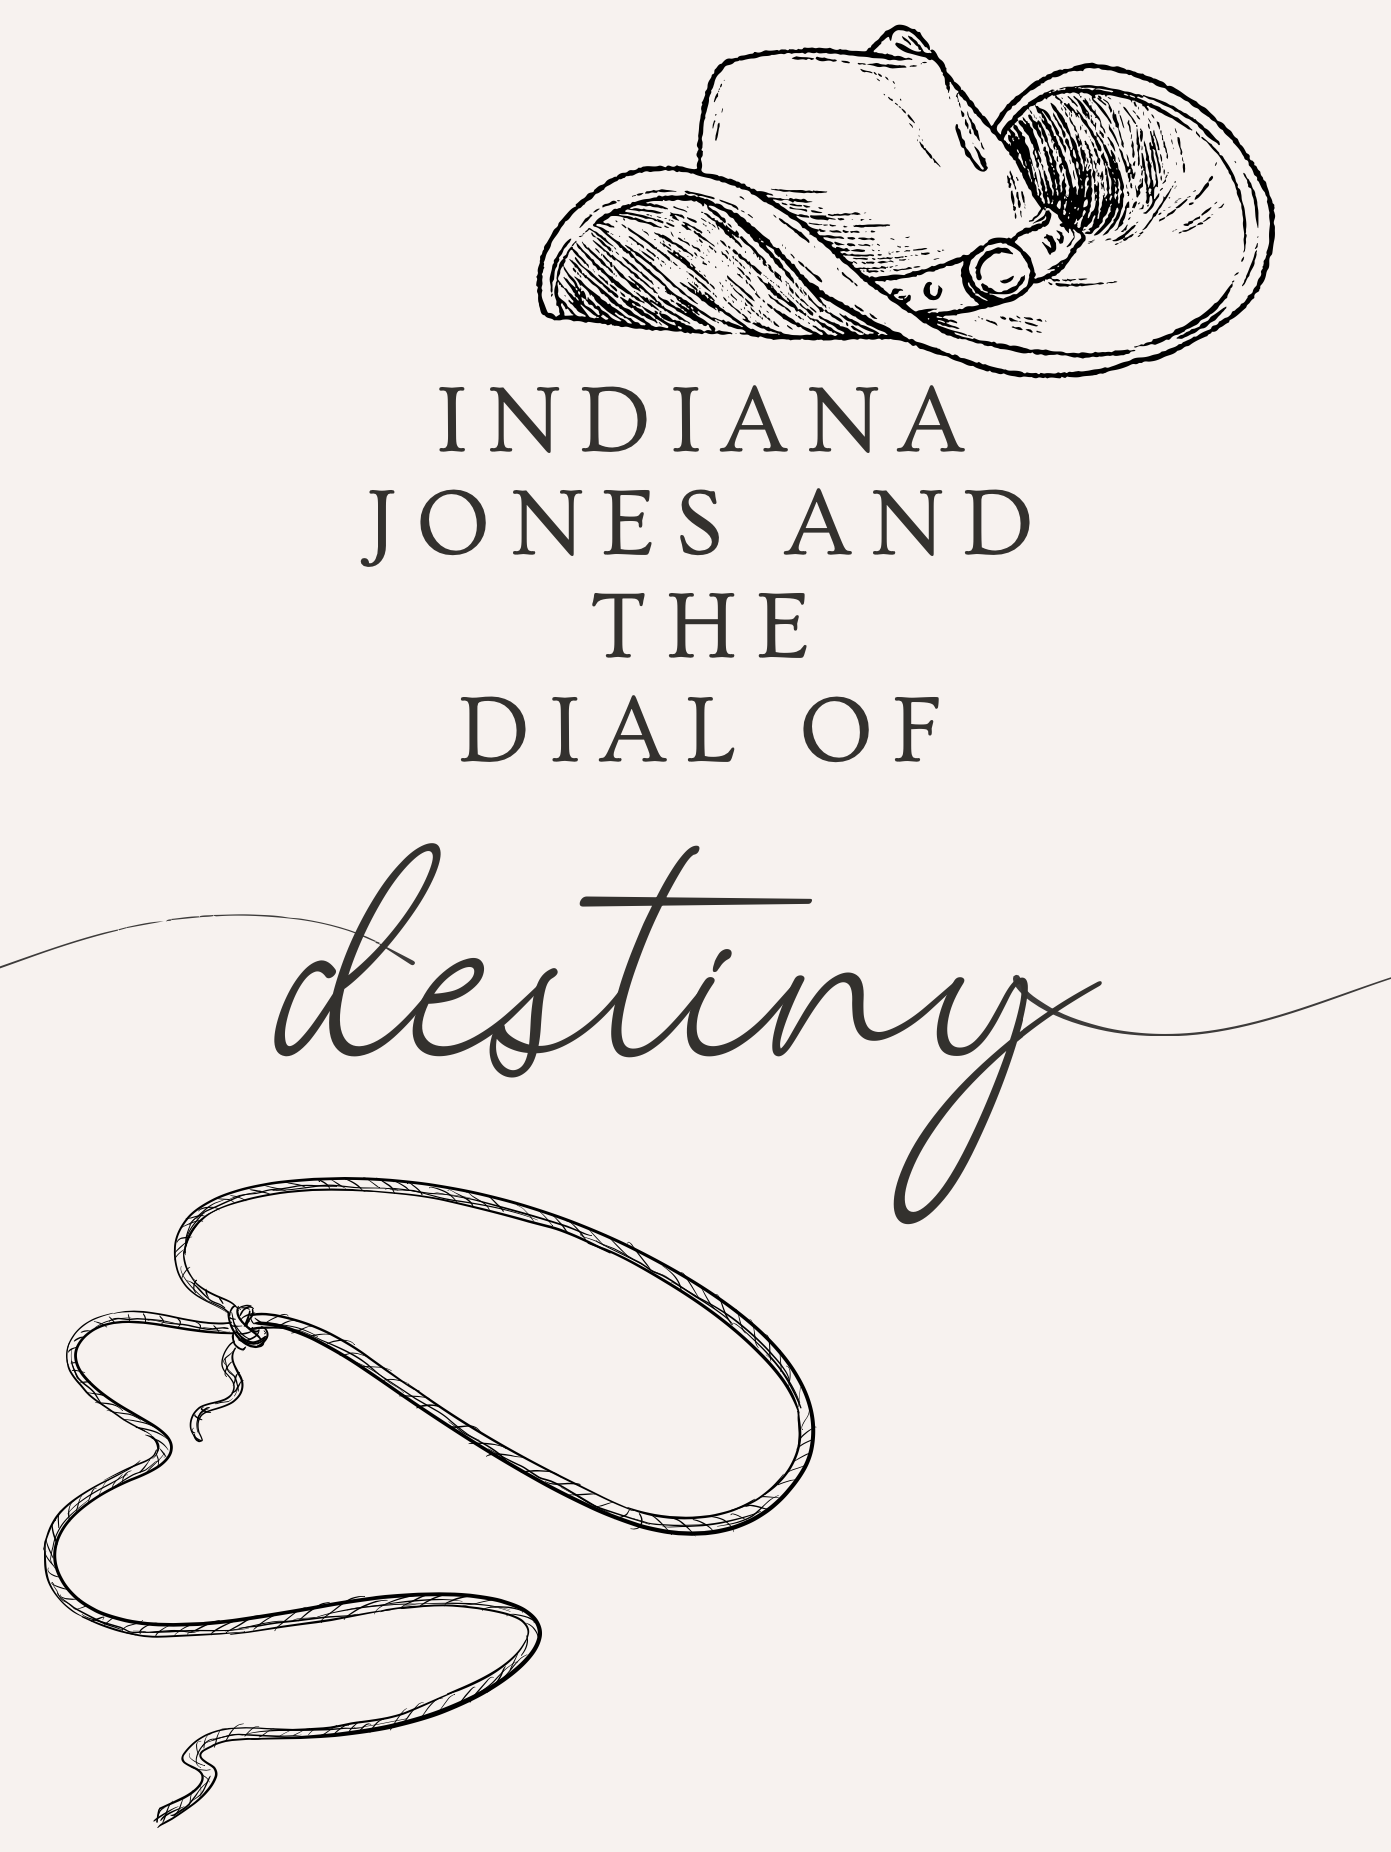 Indiana Jones and the Dial of Destiny was destined to flop